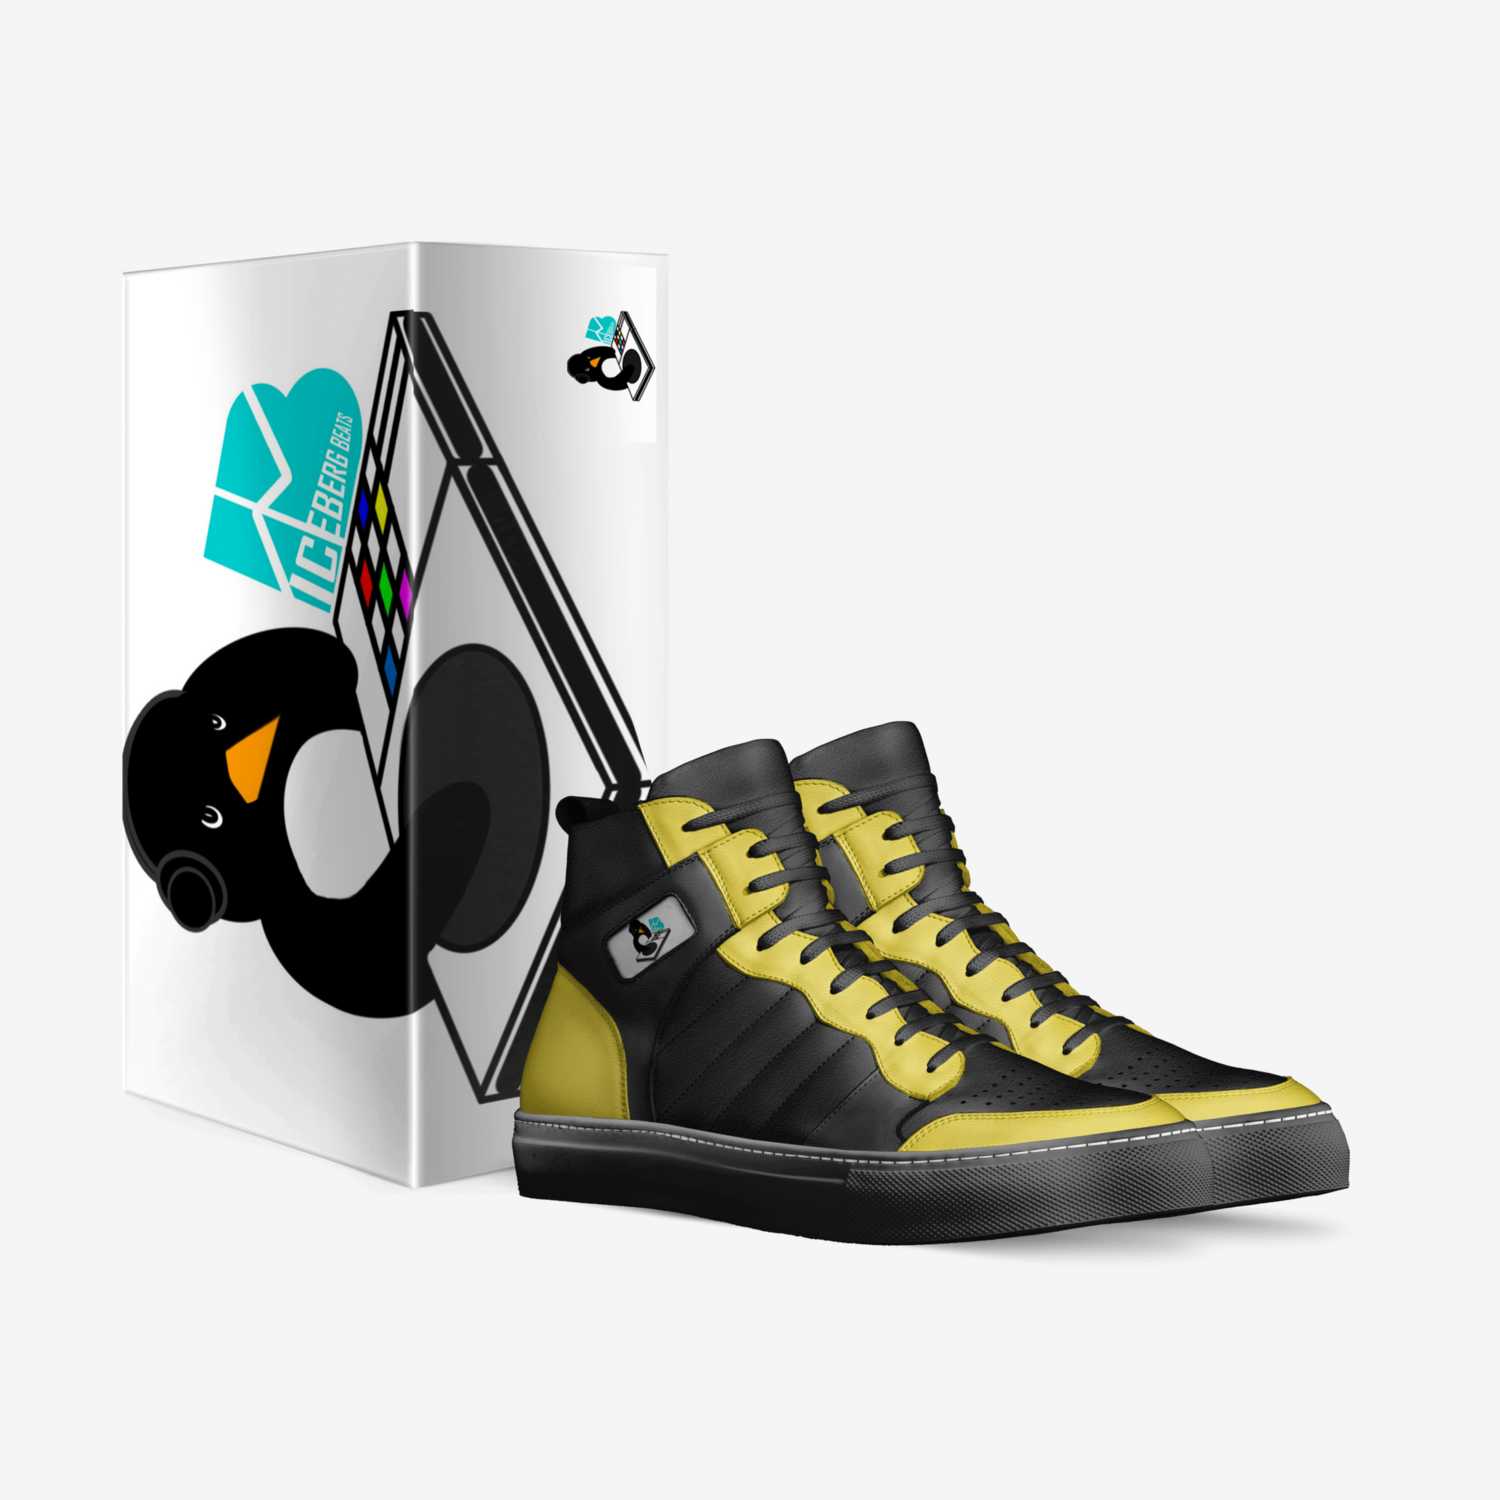 Bumble B'Z custom made in Italy shoes by Lamont Alexander | Box view